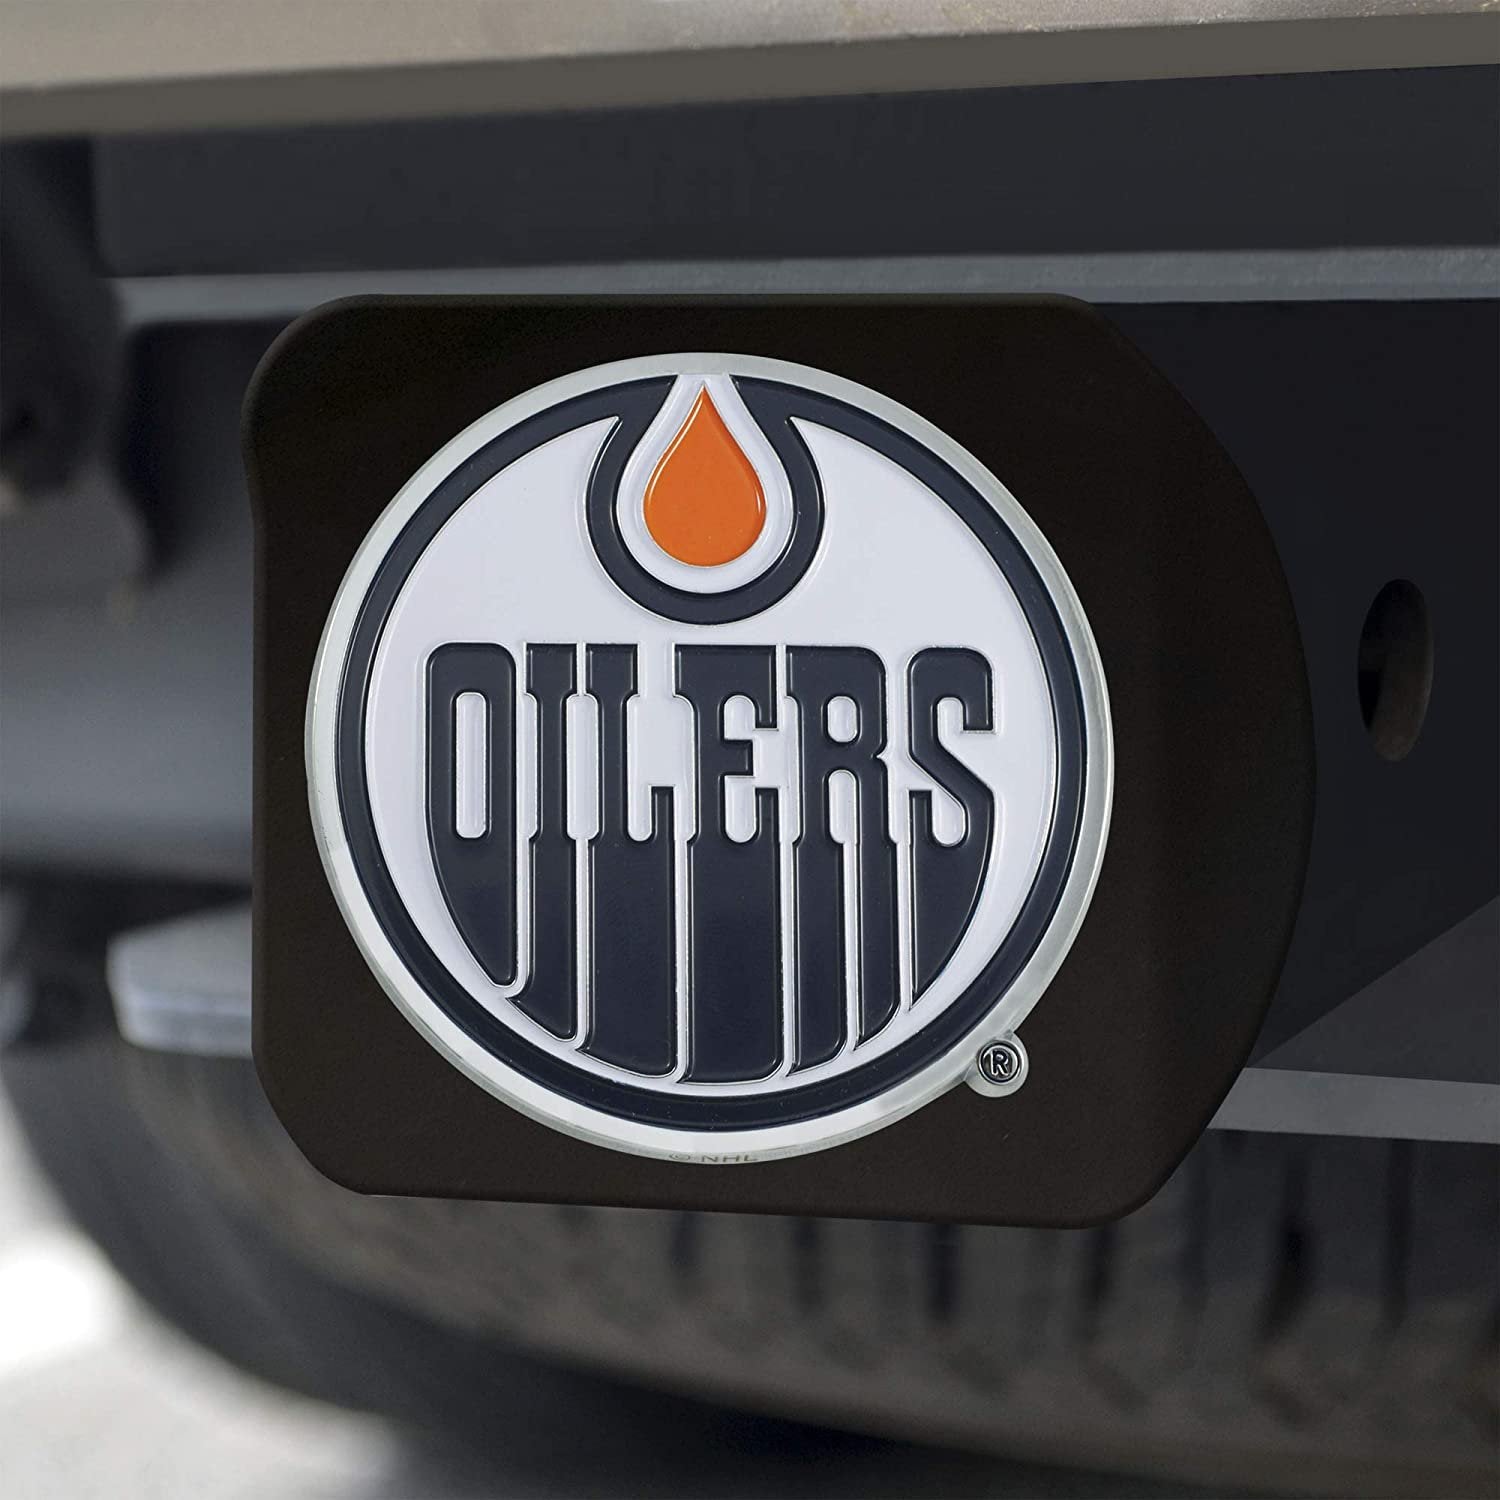 Edmonton Oilers Hitch Cover Black Solid Metal with Raised Color Metal Emblem 2" Square Type III